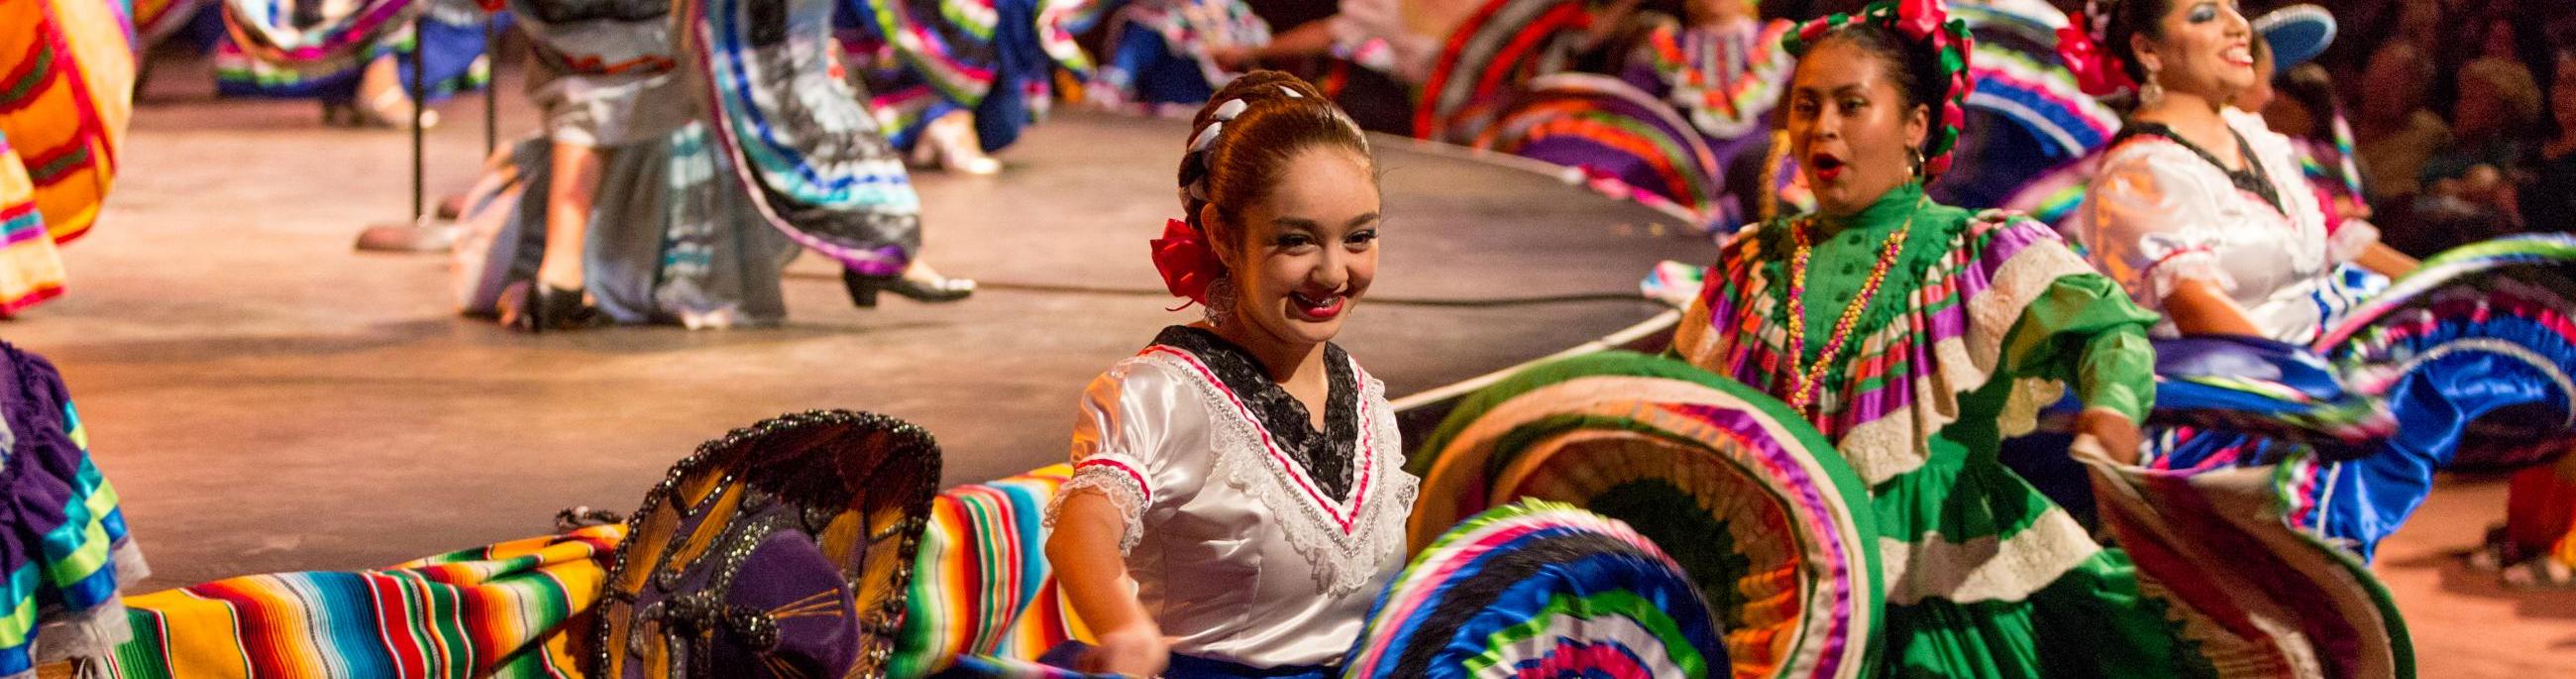 Dancers in action at the mariachi festival